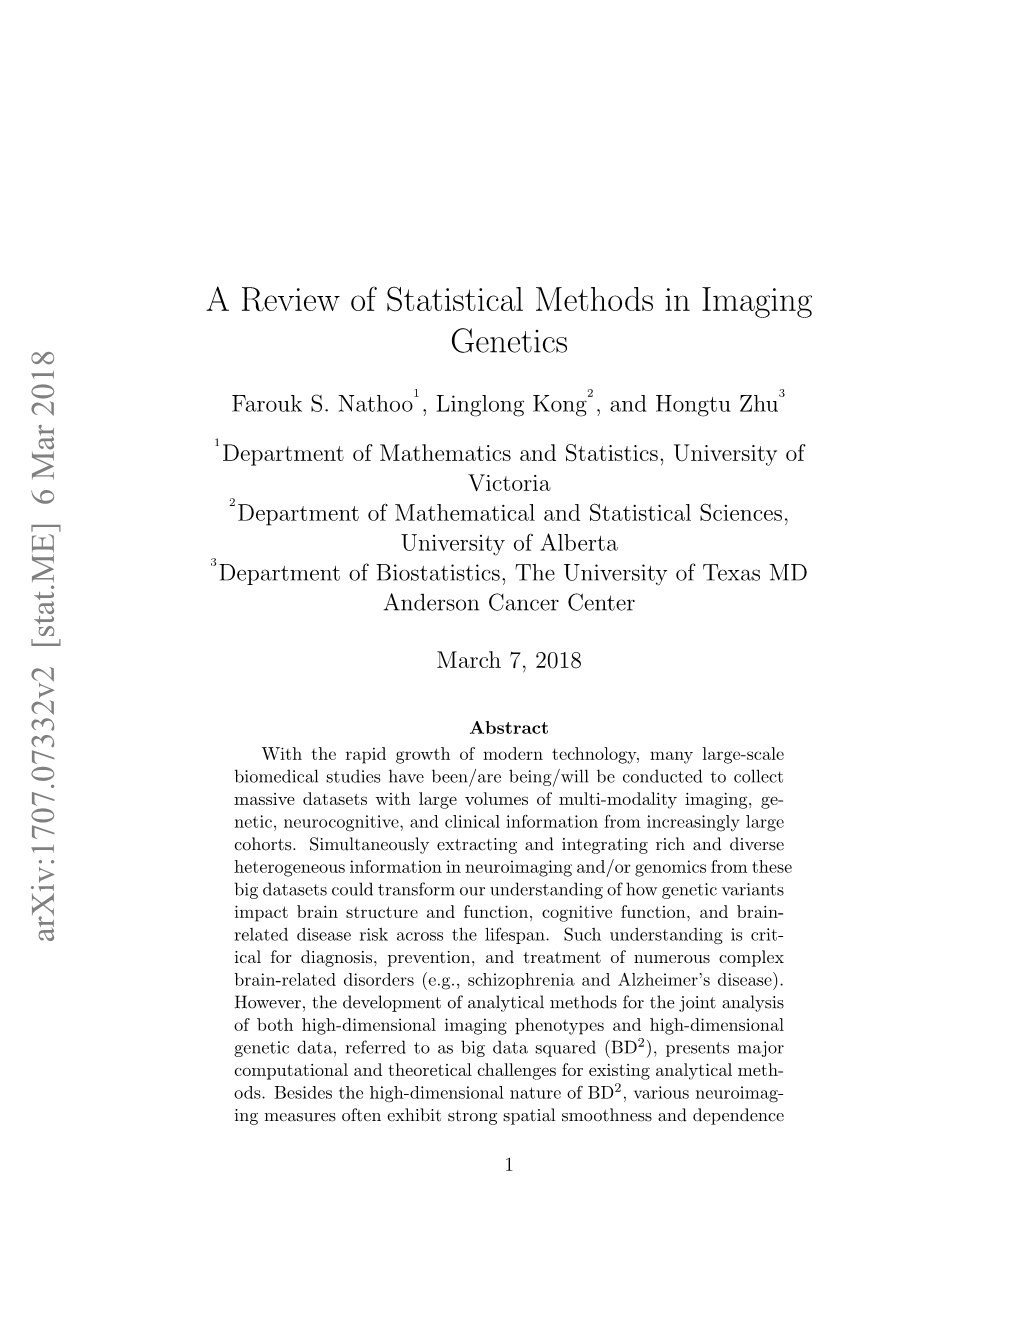 A Review of Statistical Methods in Imaging Genetics Arxiv:1707.07332